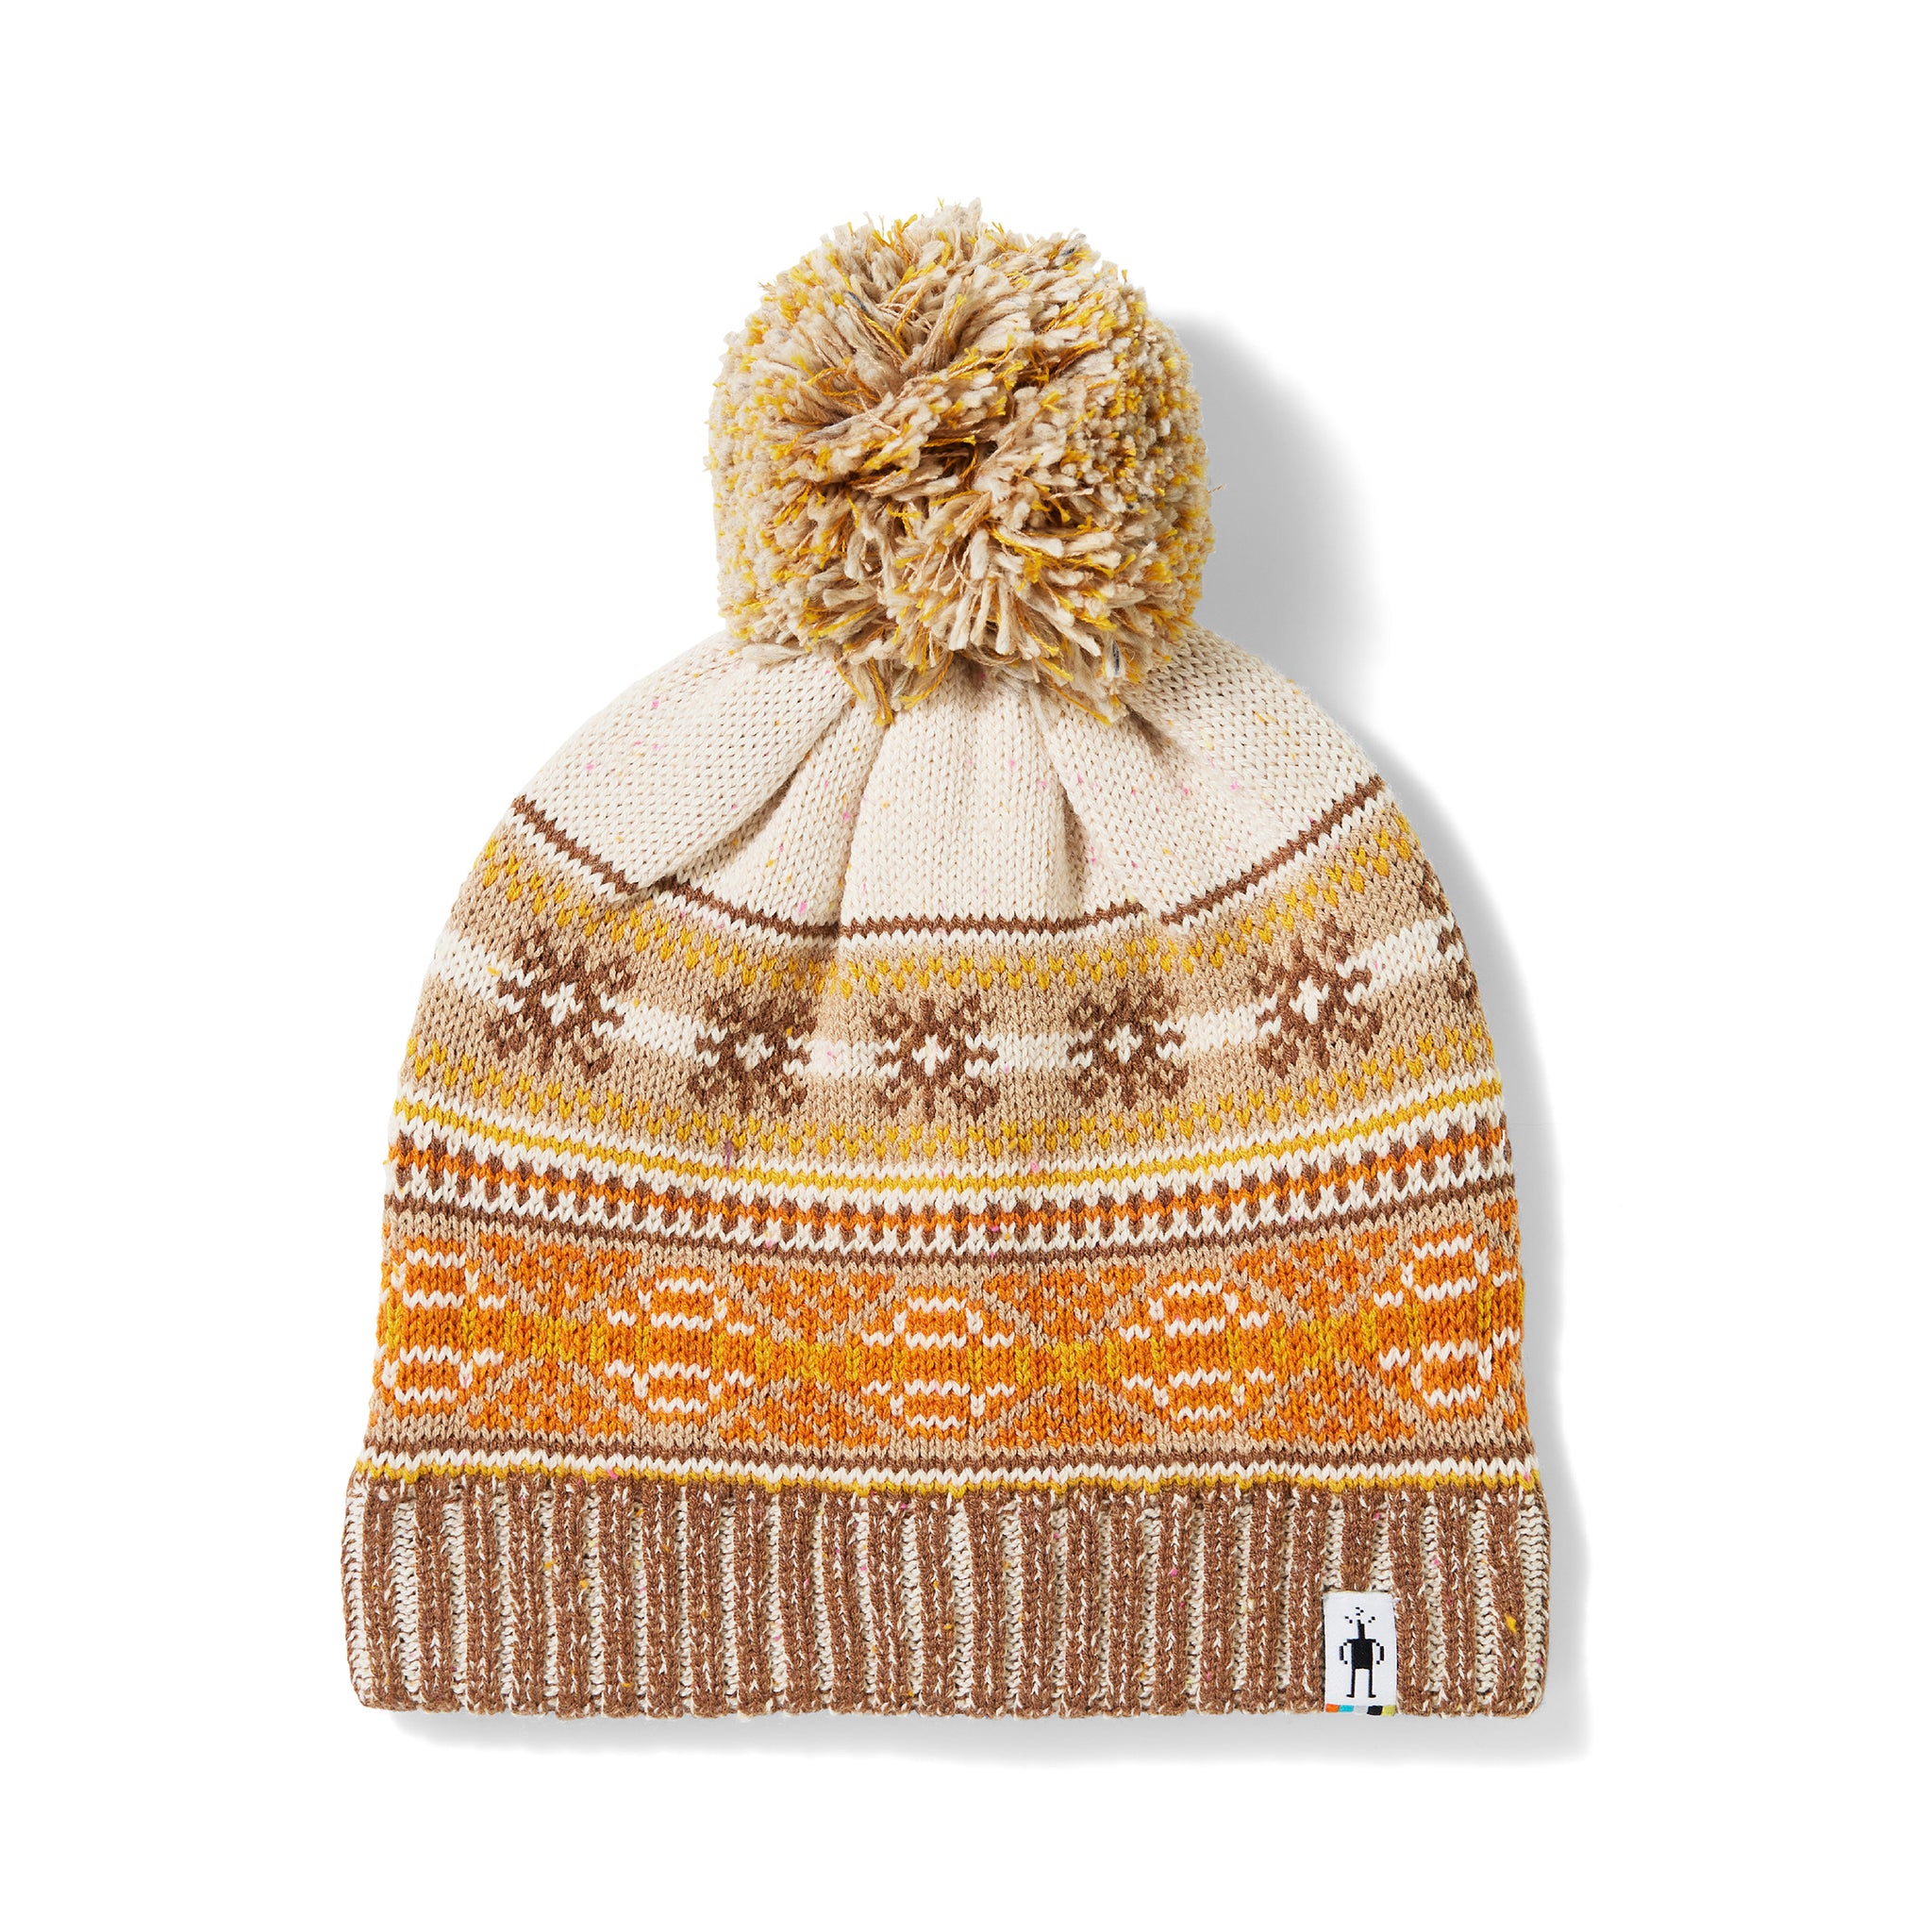 Chairlift Beanie - Almond Donegal